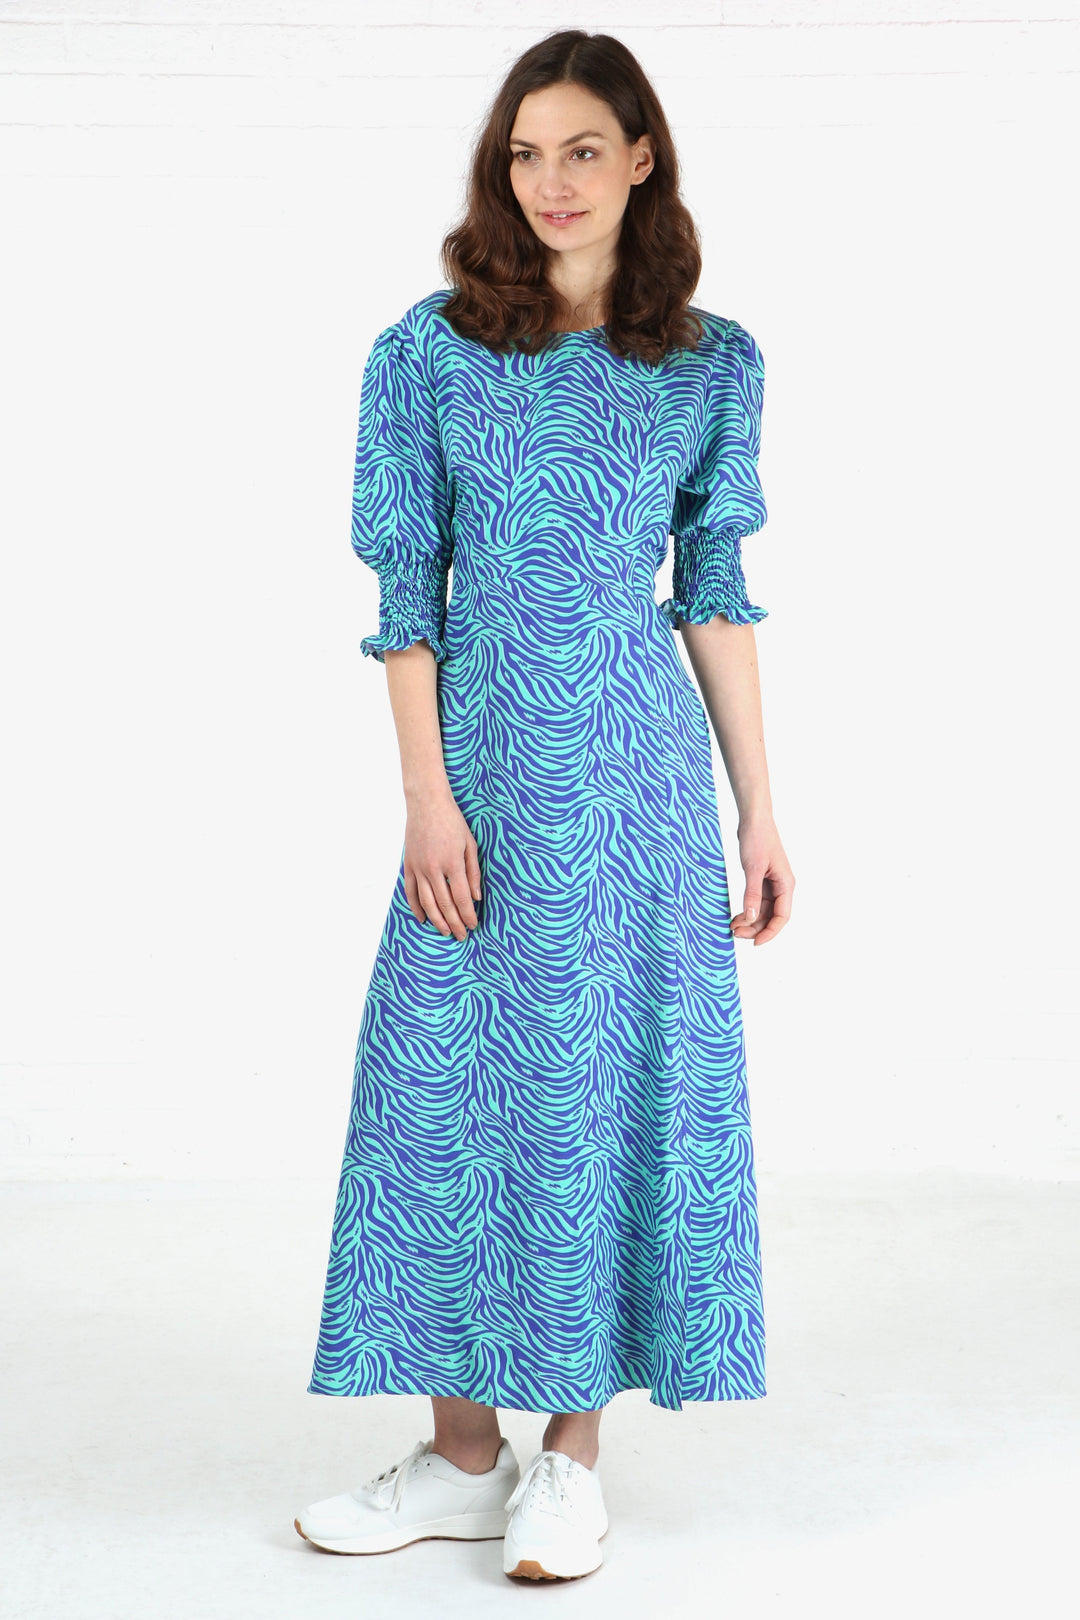 model wearing a blue zebra and lightning bolt  print midaxi length dress with 3/4 sleeves with shirred cuffs